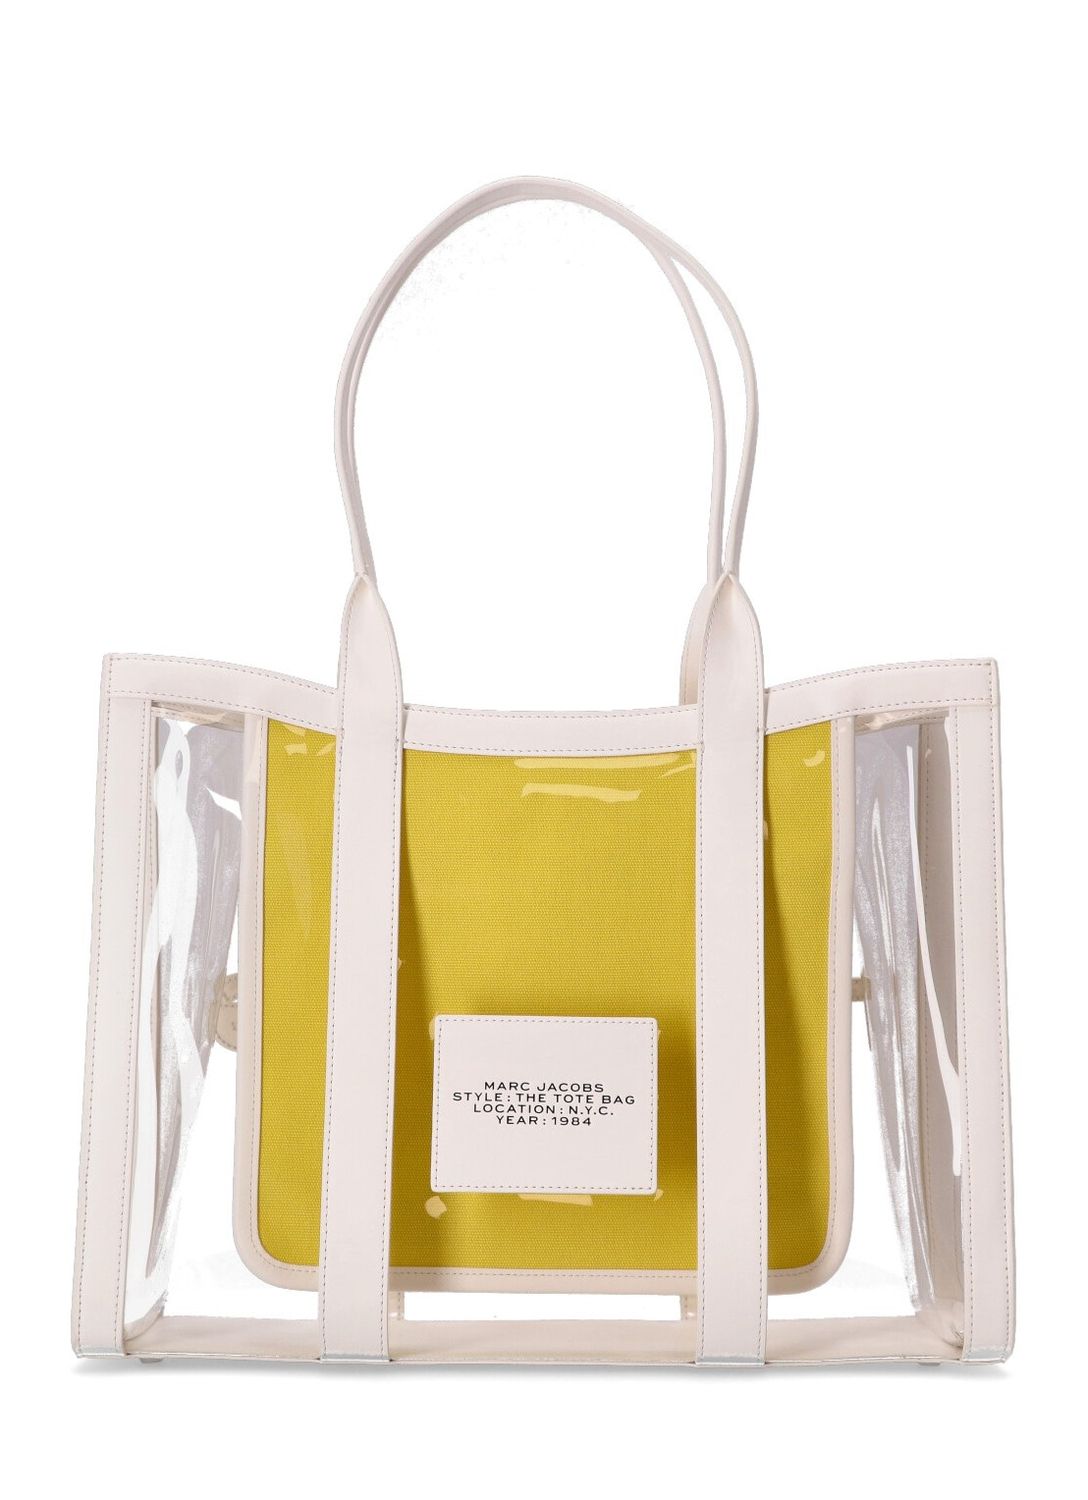 MARC JACOBS The Clear Large White PVC Tote Bag for Women